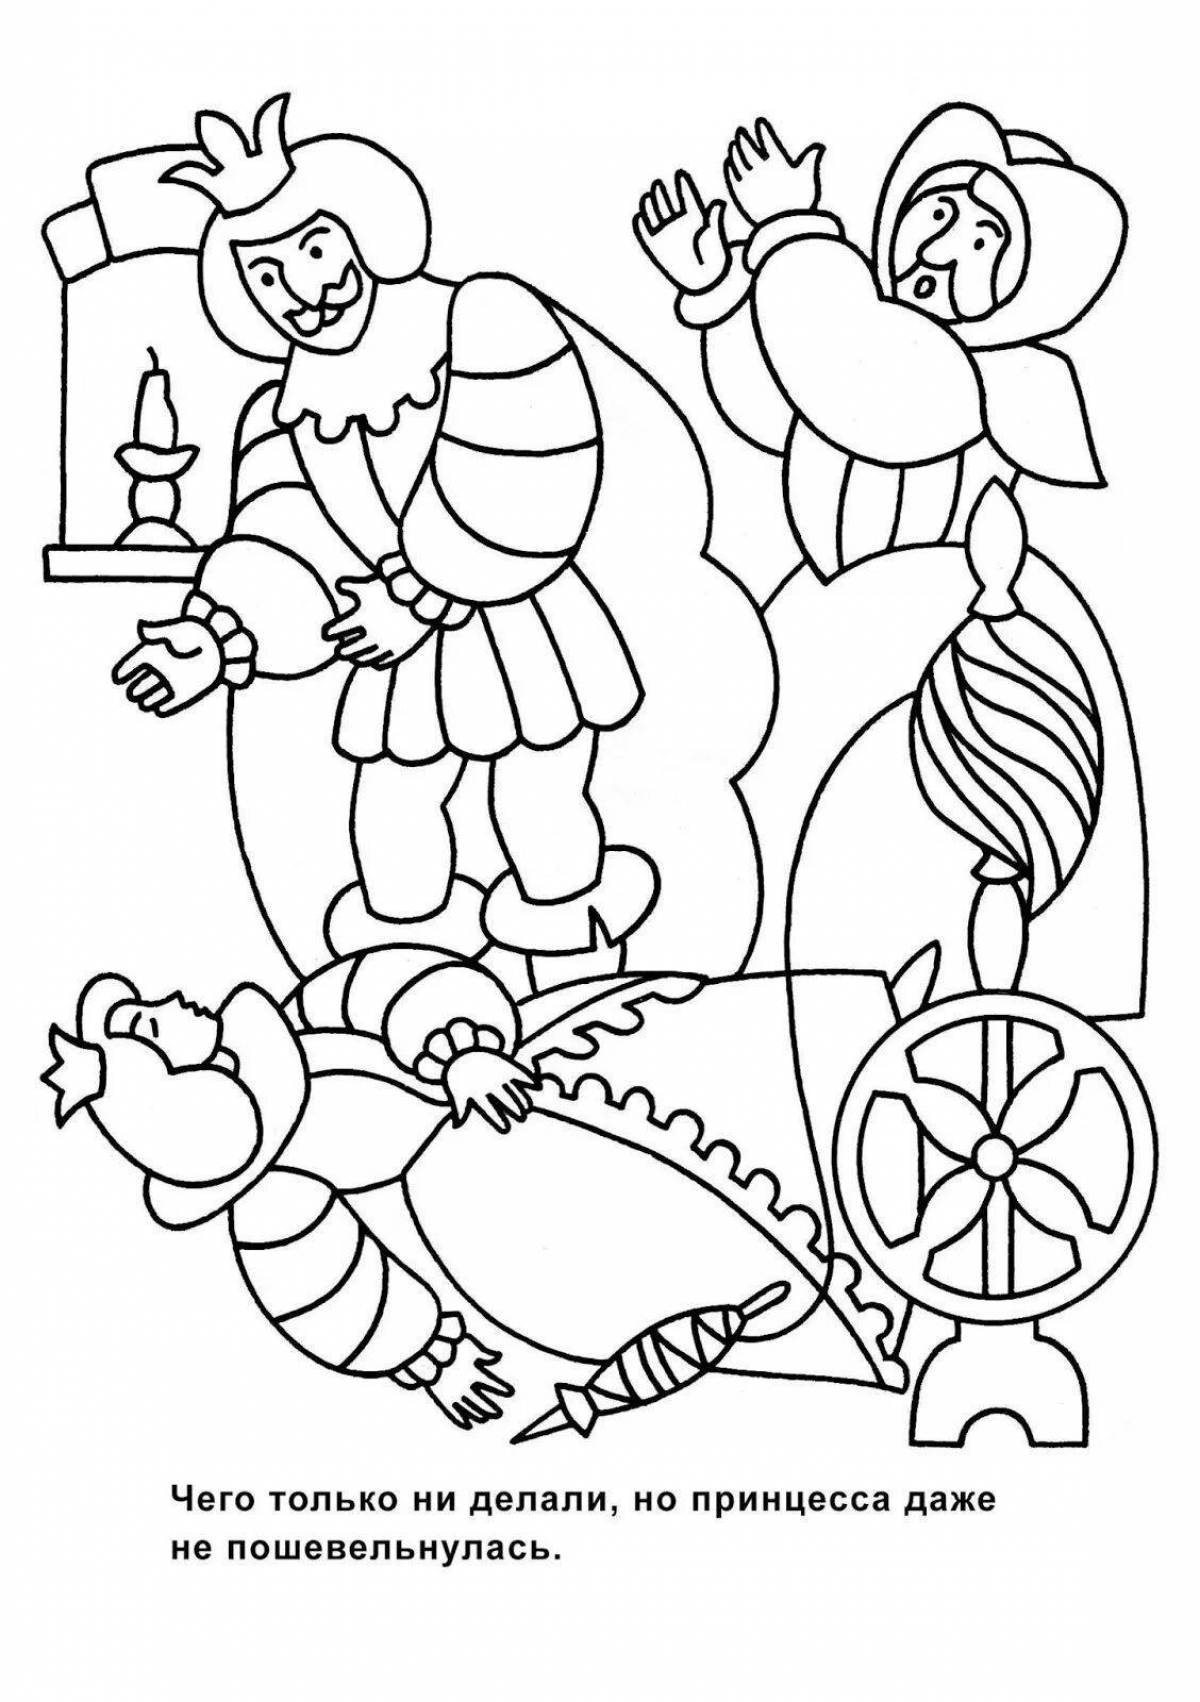 Playful coloring book from perrault's tales